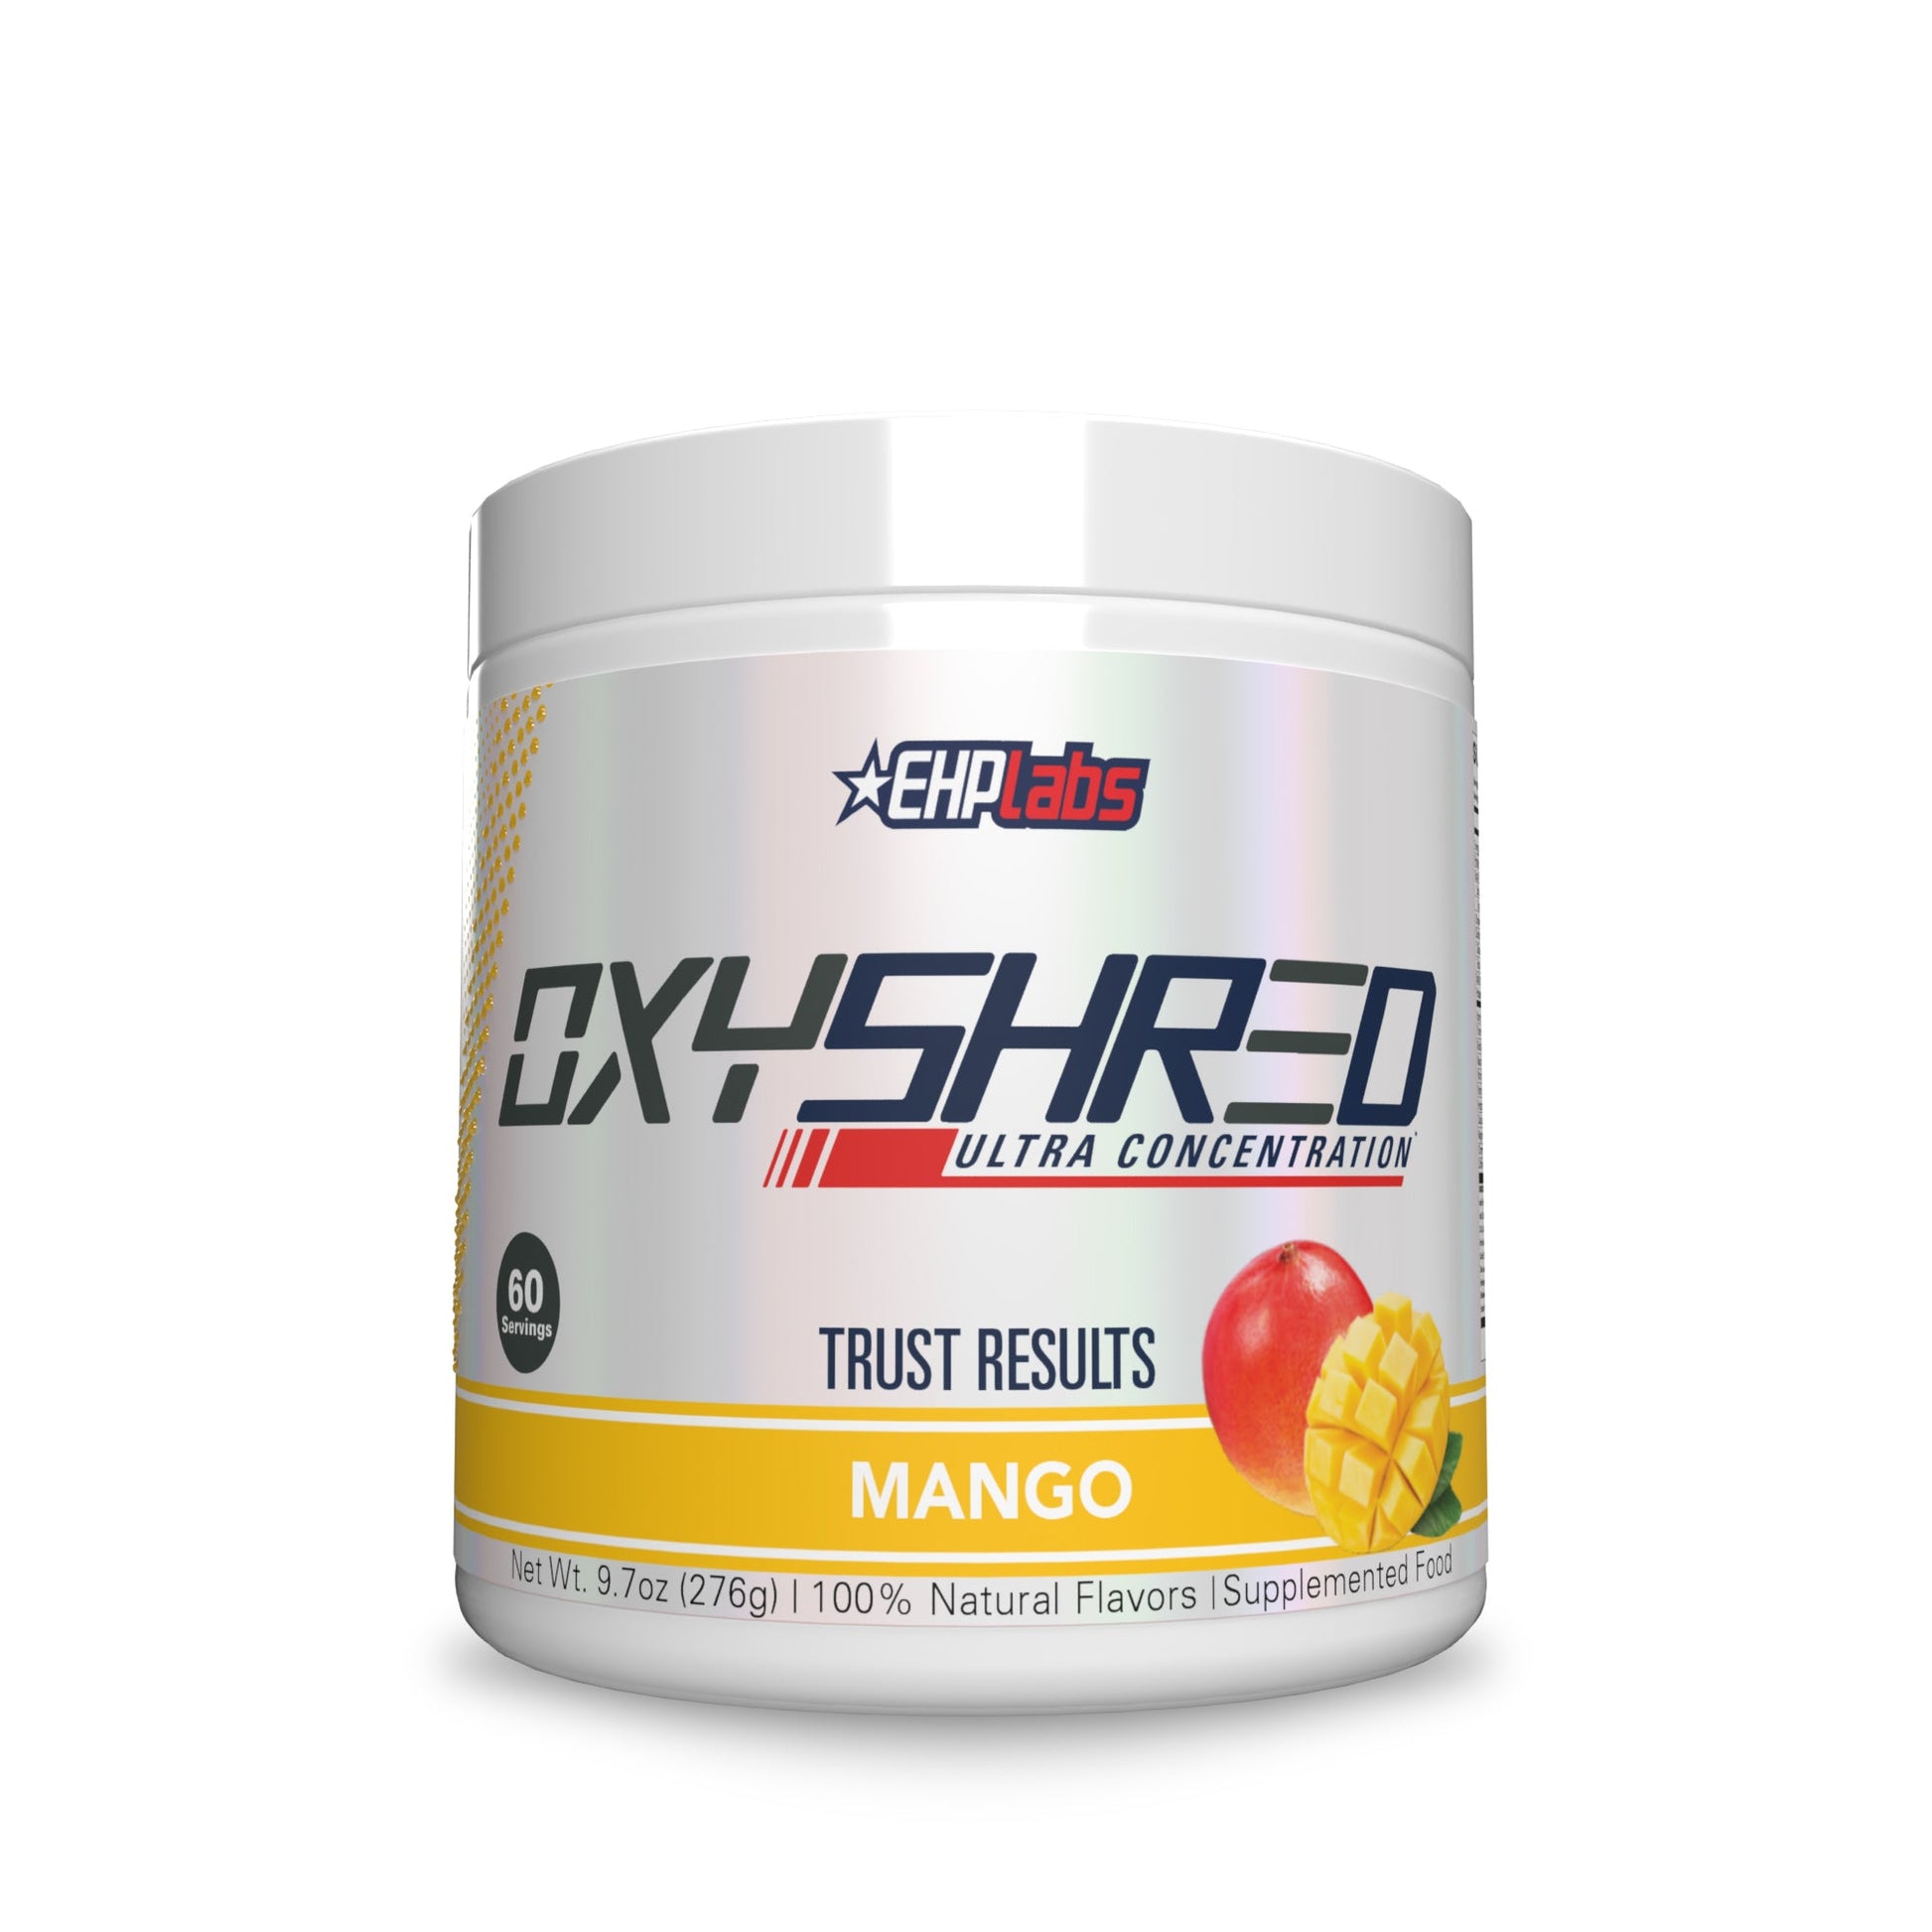 EHP Labs OxyShred Ultra Concentration 60 Serves - Supplements - Mango - The Cave Gym